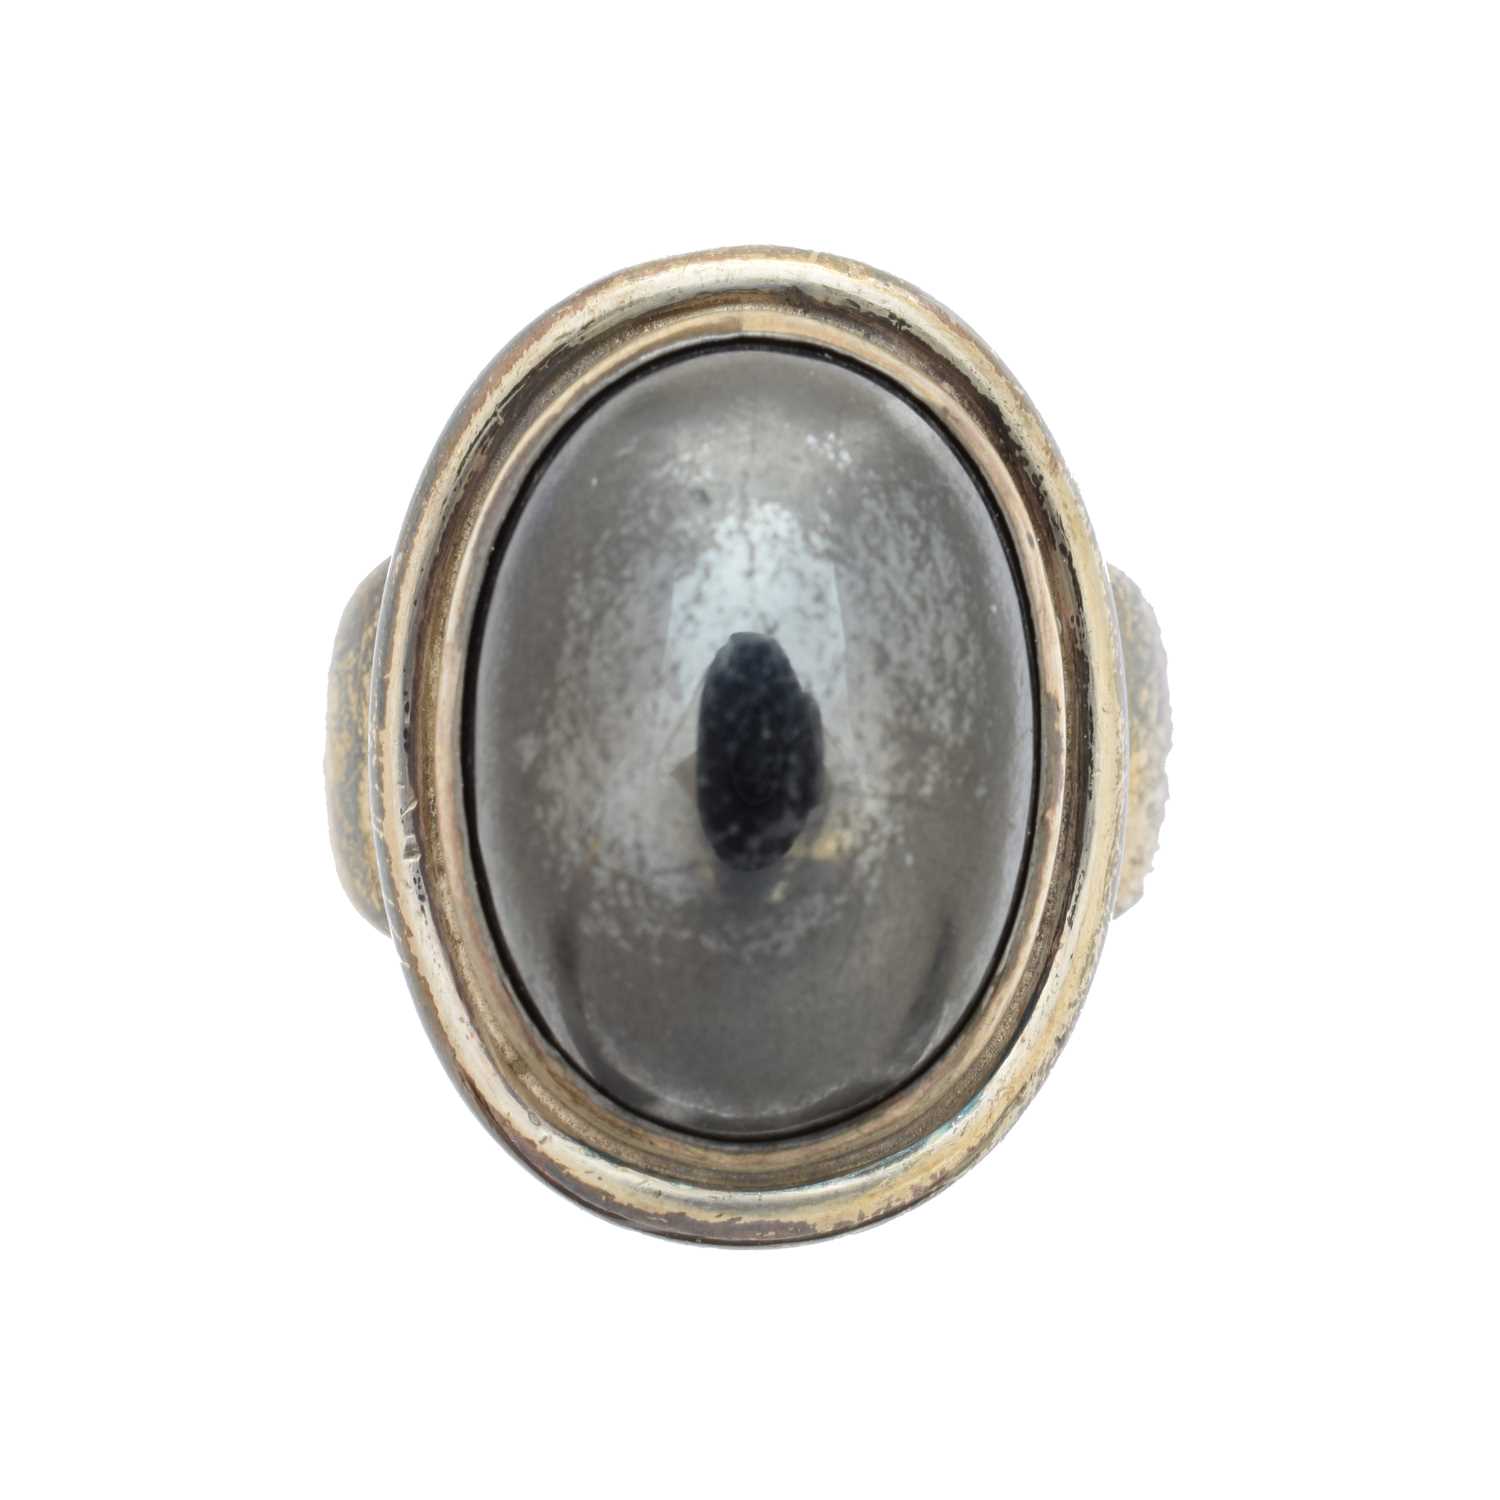 A Georg Jensen ring, no. 46A, the oval haematite cabochon within a grooved surround and tapered shoulders, maker's marks for Georg Jensen, import marks for London, 1962, ring size P, gross weight 12.6g.